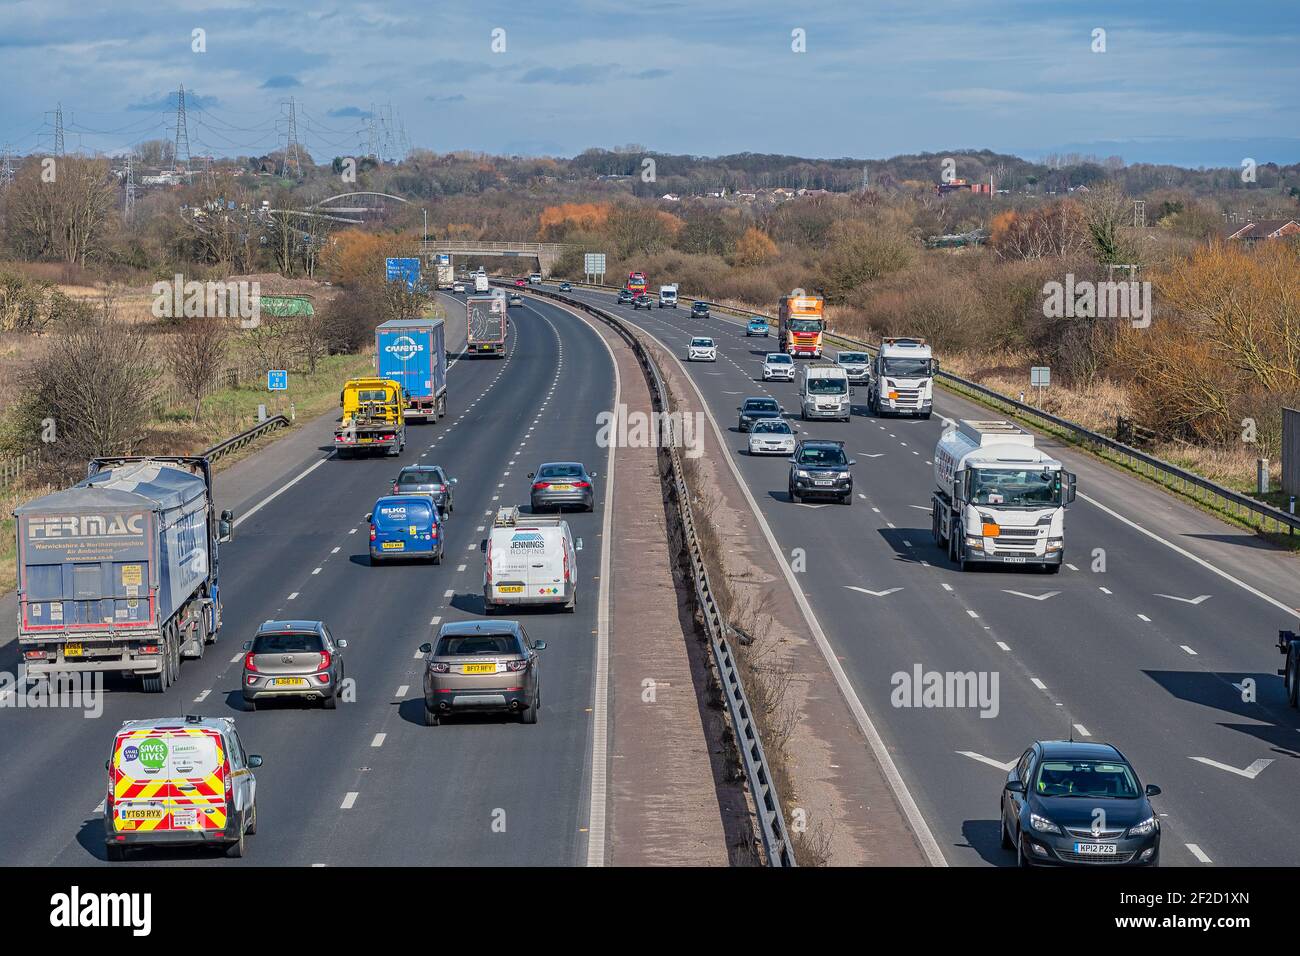 CHESHIRE, UK - MARCH 8, 2020: Overhead image of traffic travelling along the M56 motorway Stock Photo